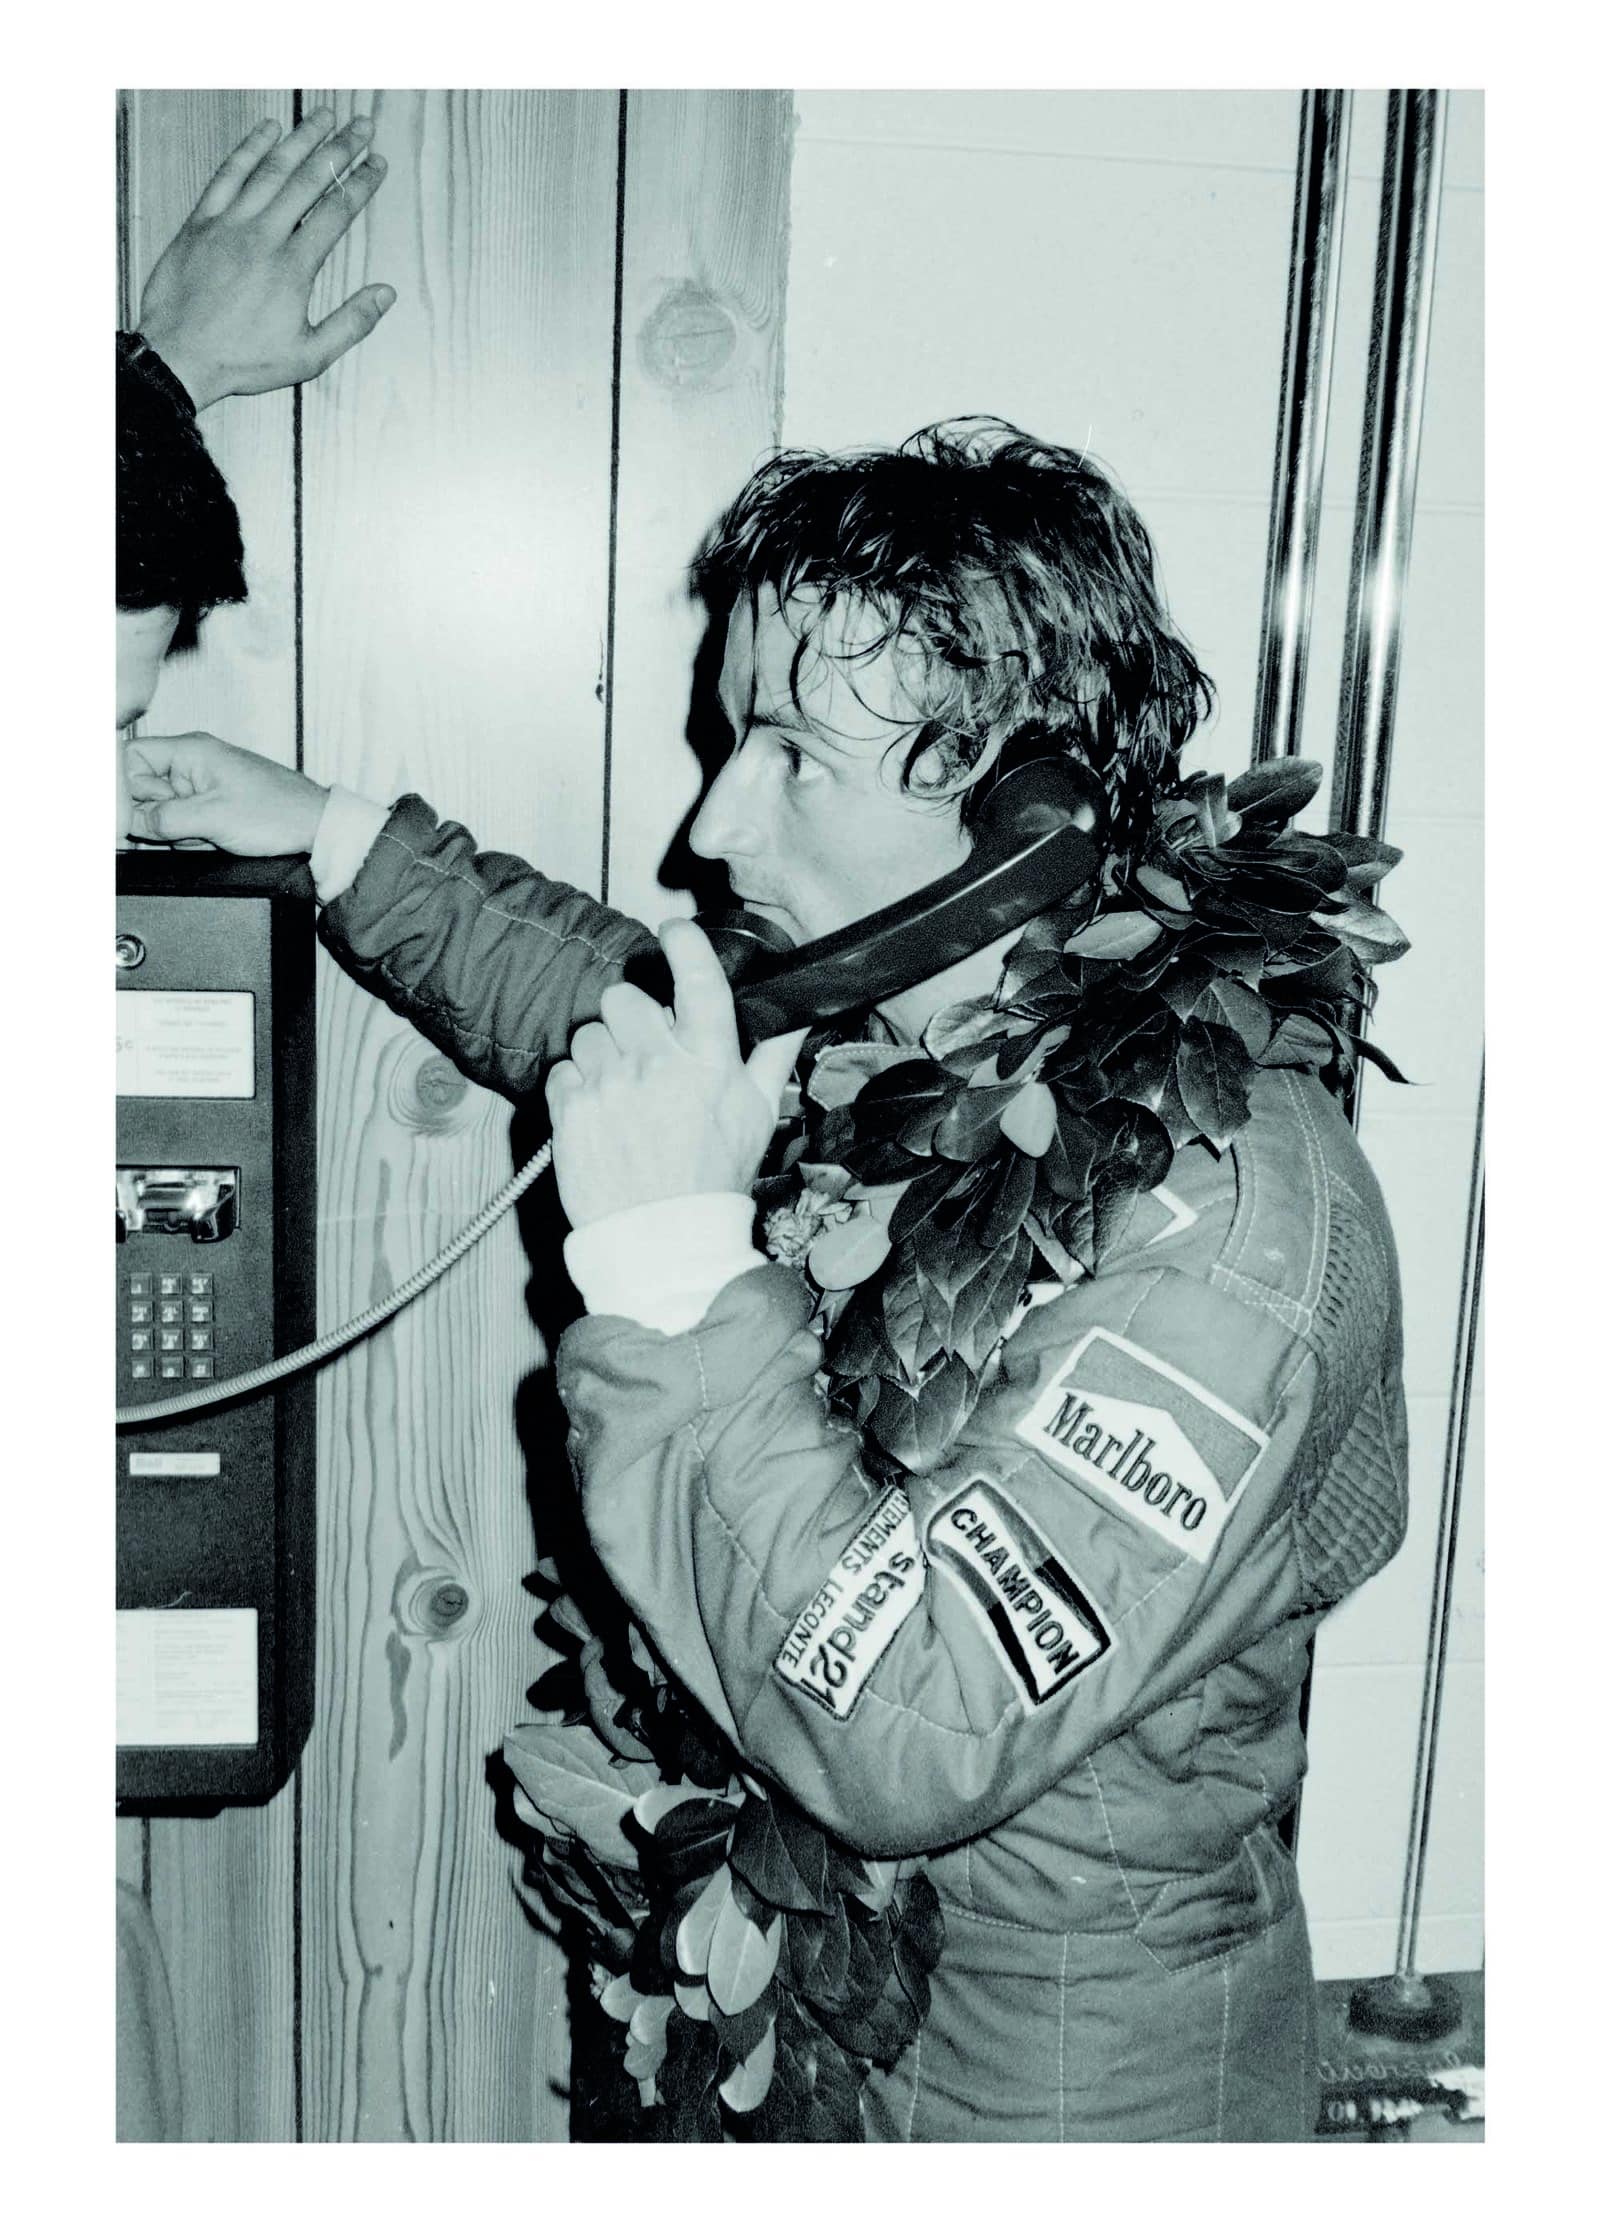 Rene-Arnoux-makes-a-call-from-a-pay-phone